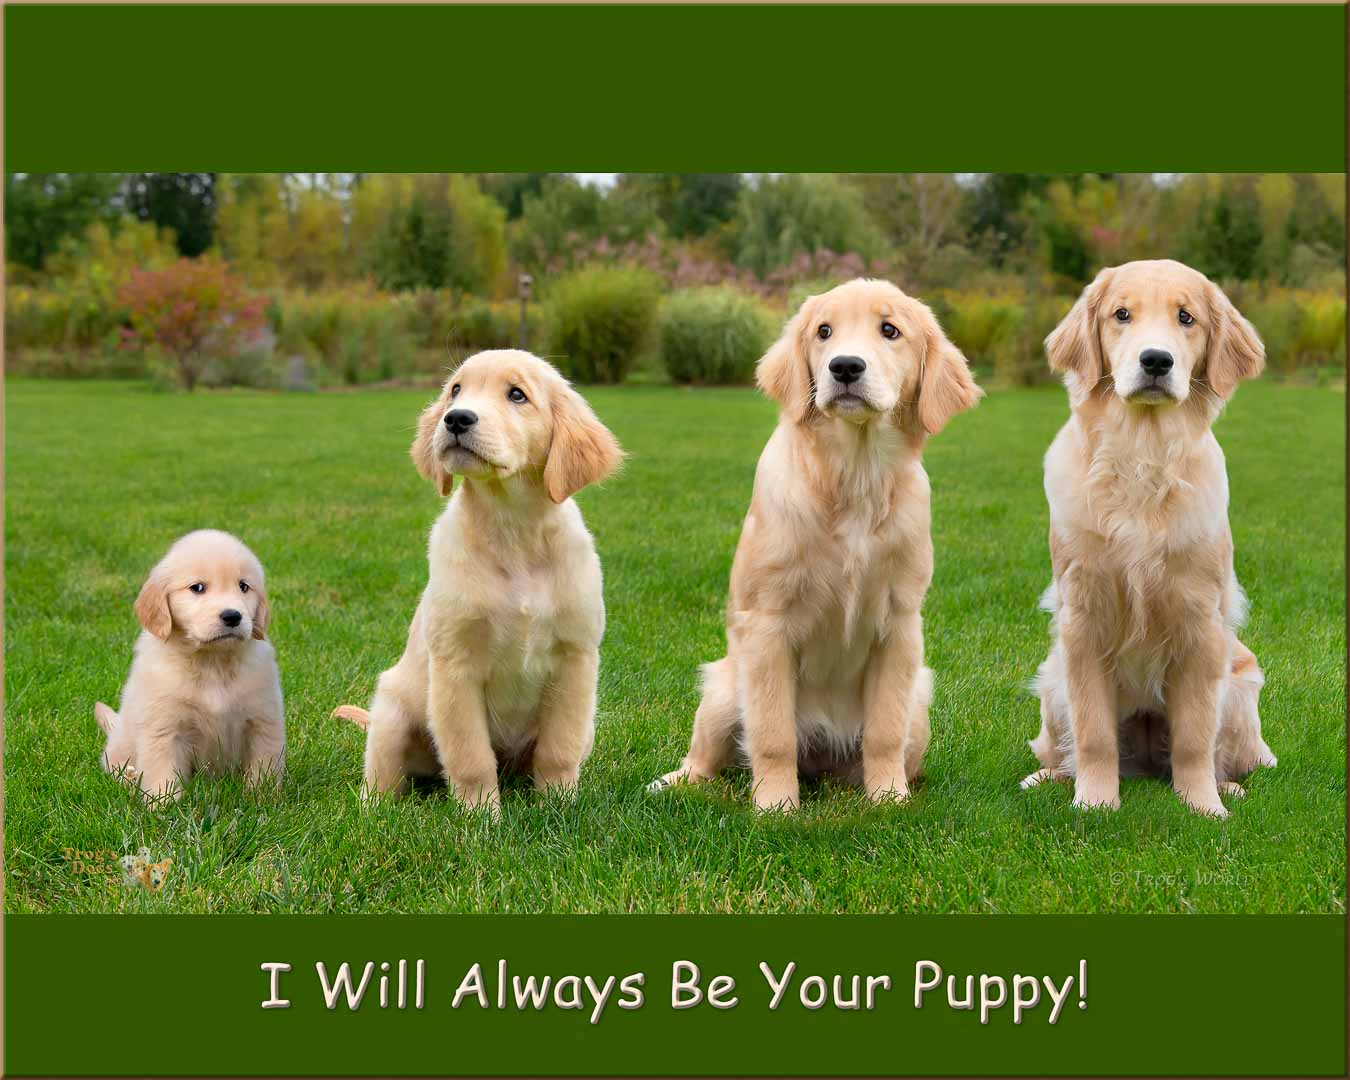 Montage showing growth of a golden retriever puppy